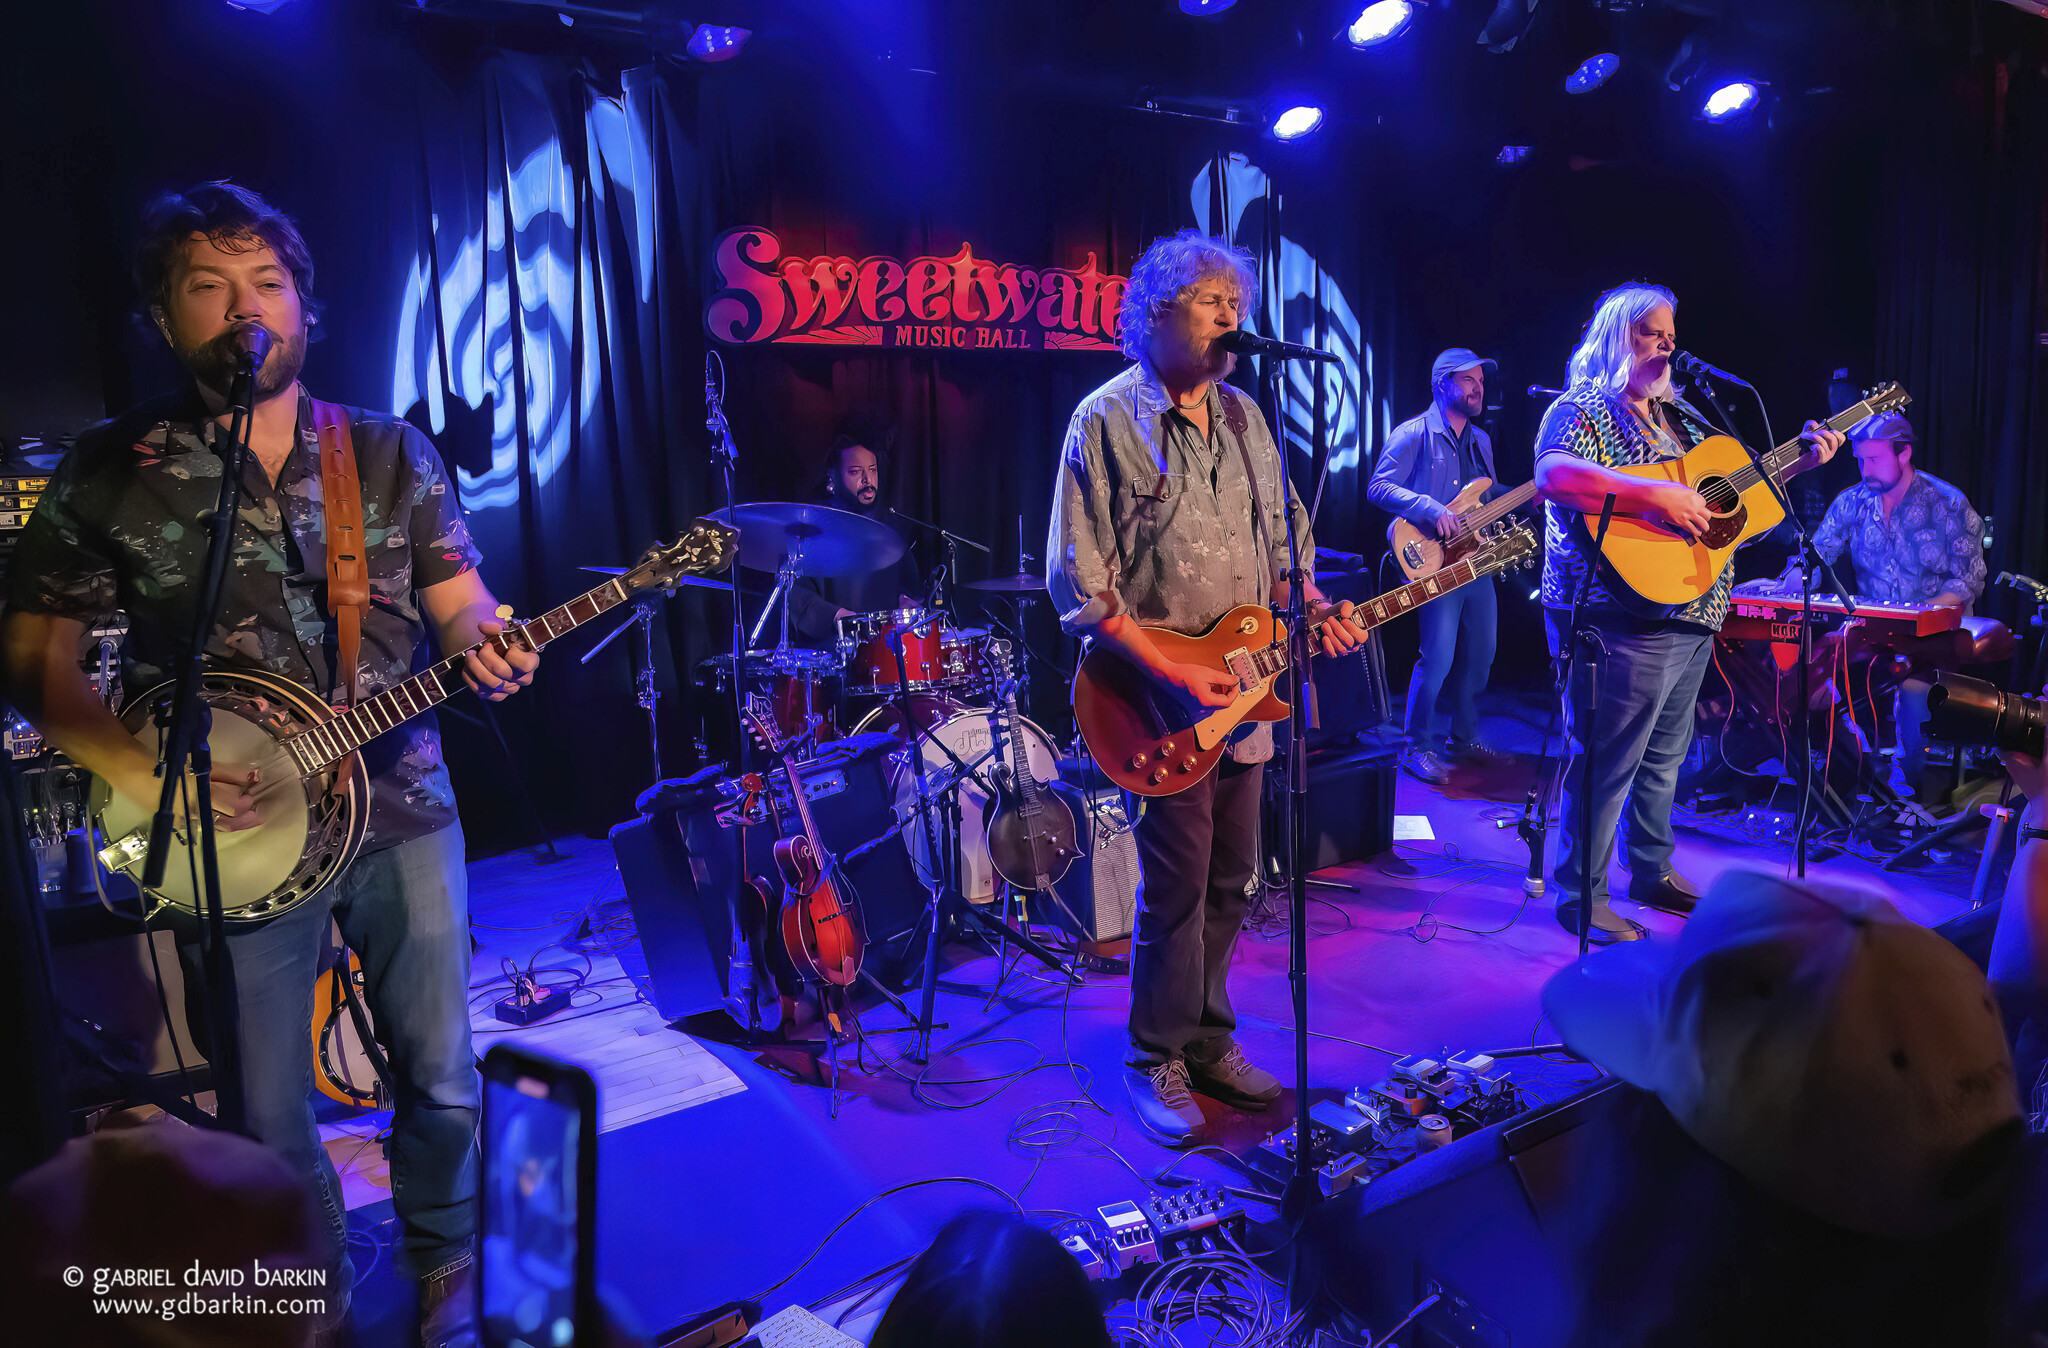 Leftover Salmon New Year's Eve Run at The Sweetwater